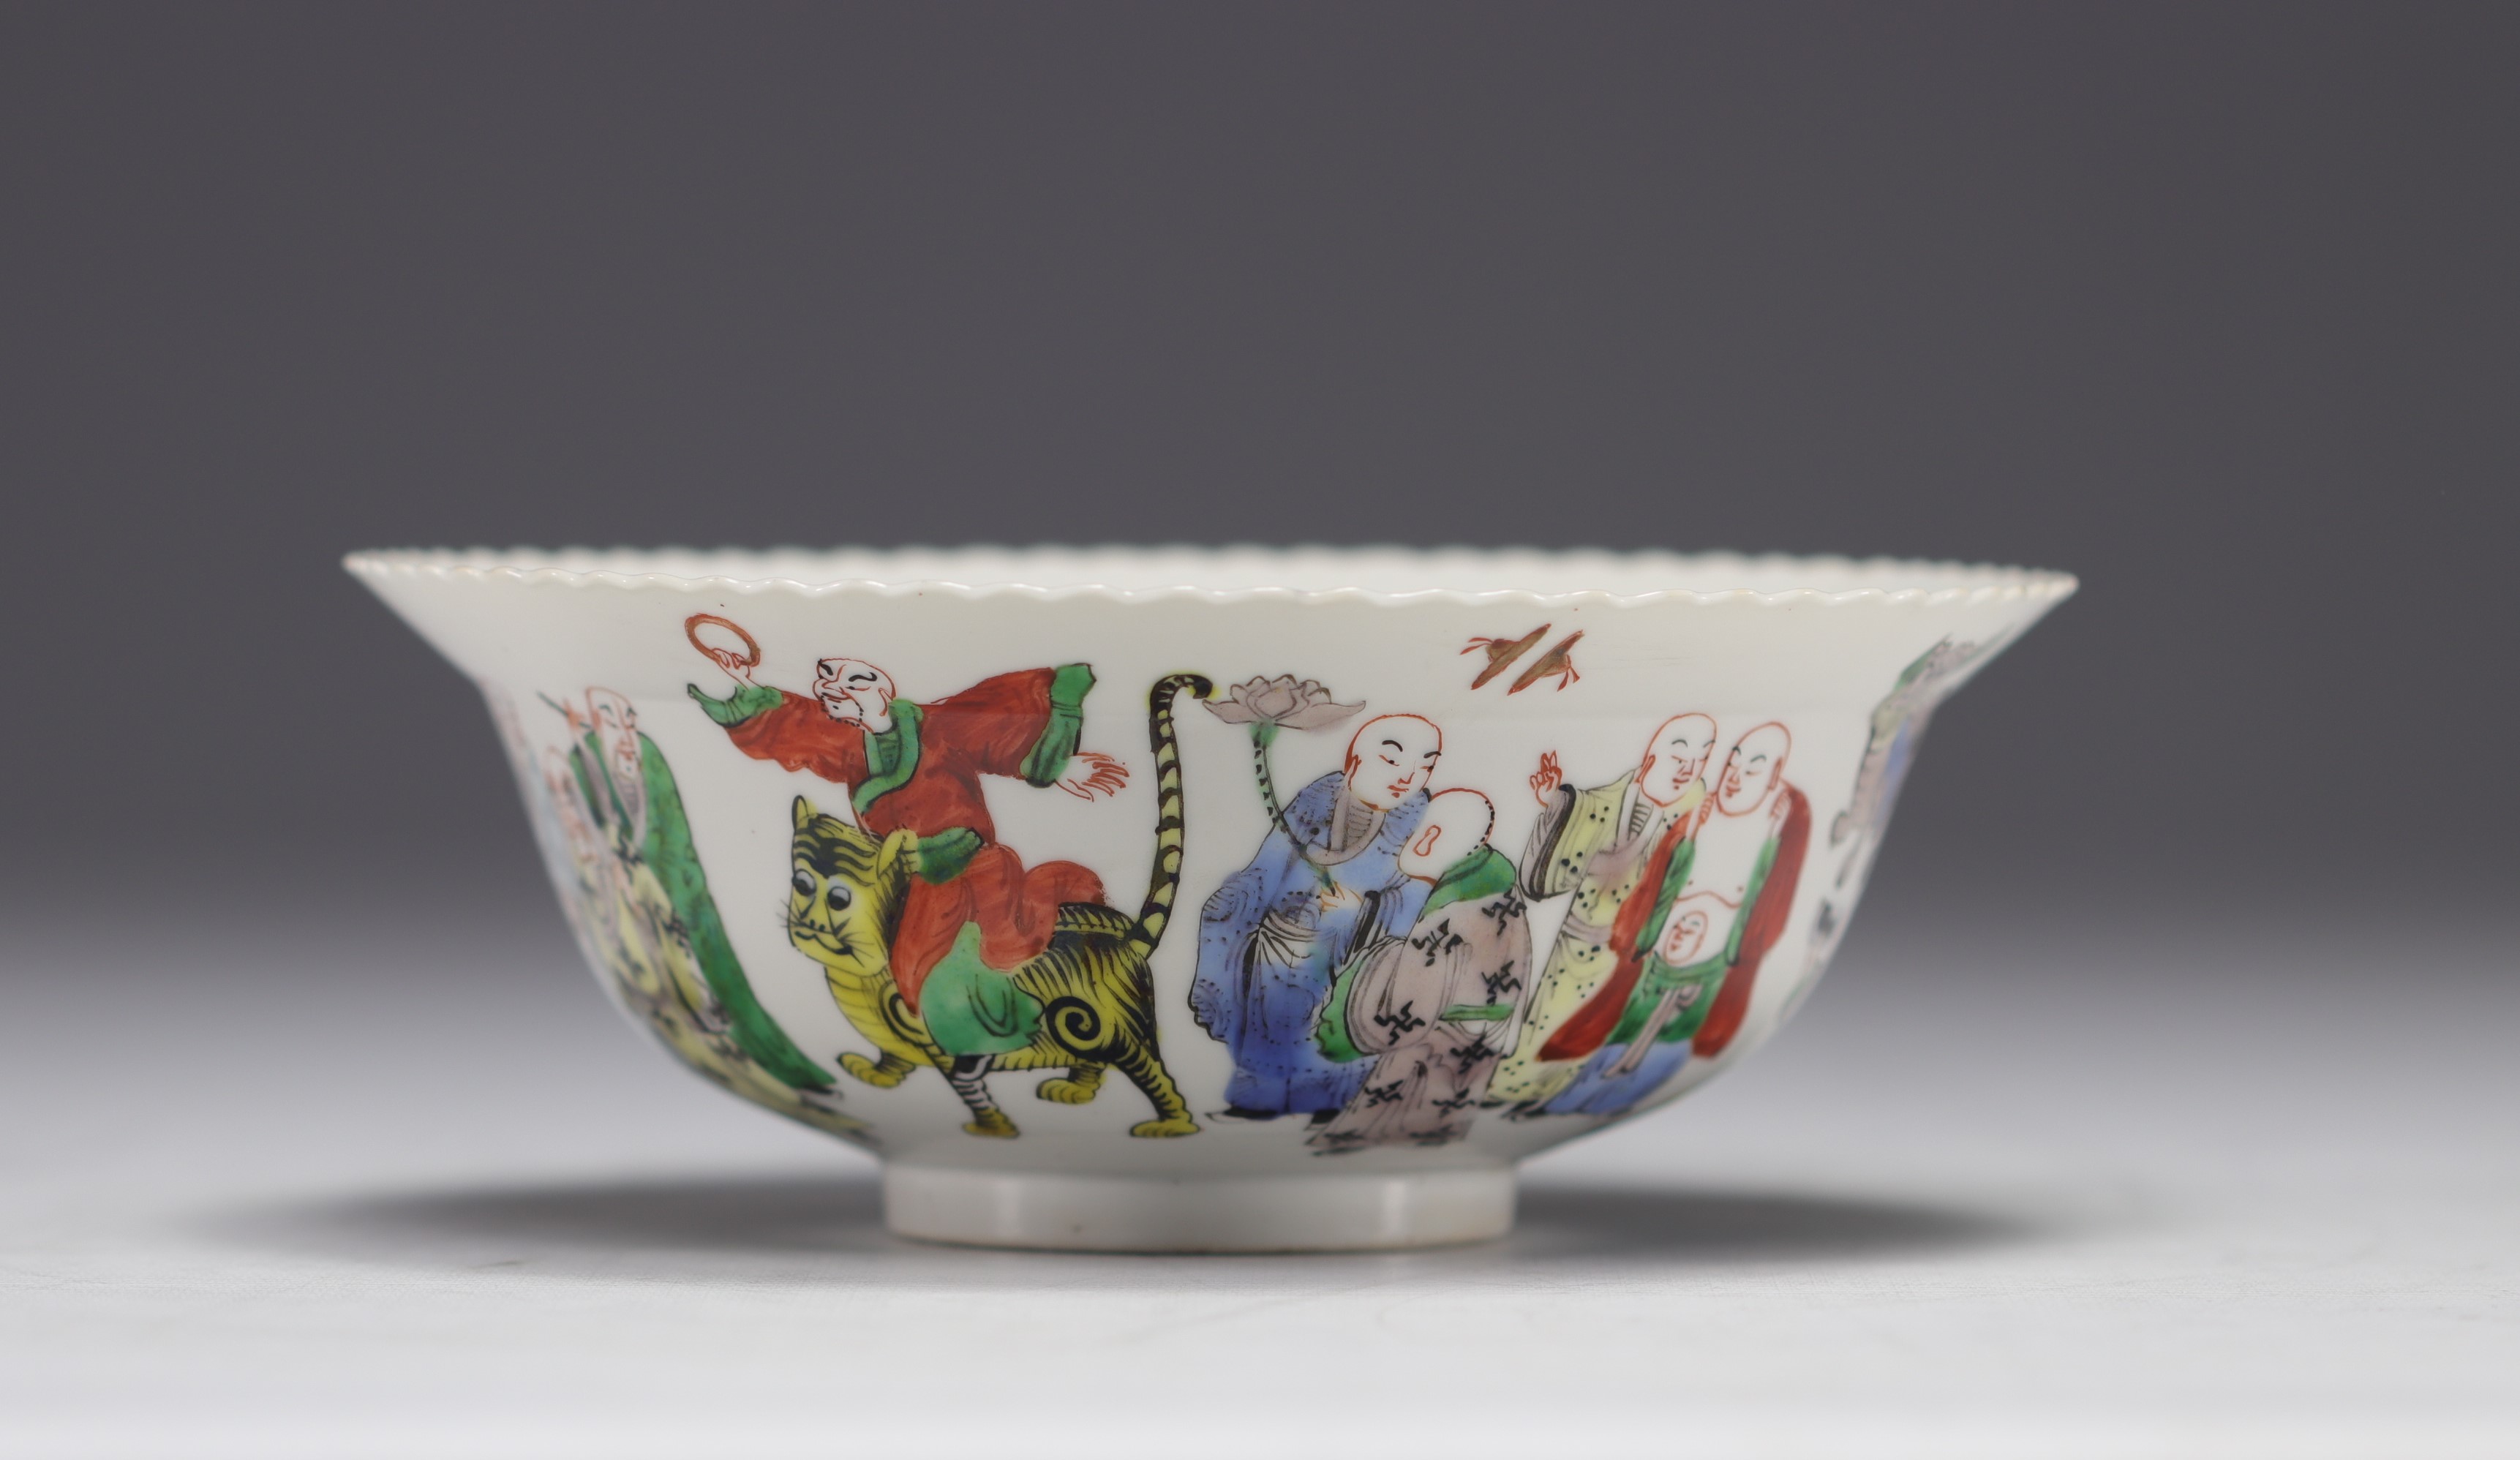 China - Porcelain bowl decorated with frieze of characters, mark in red under the piece.